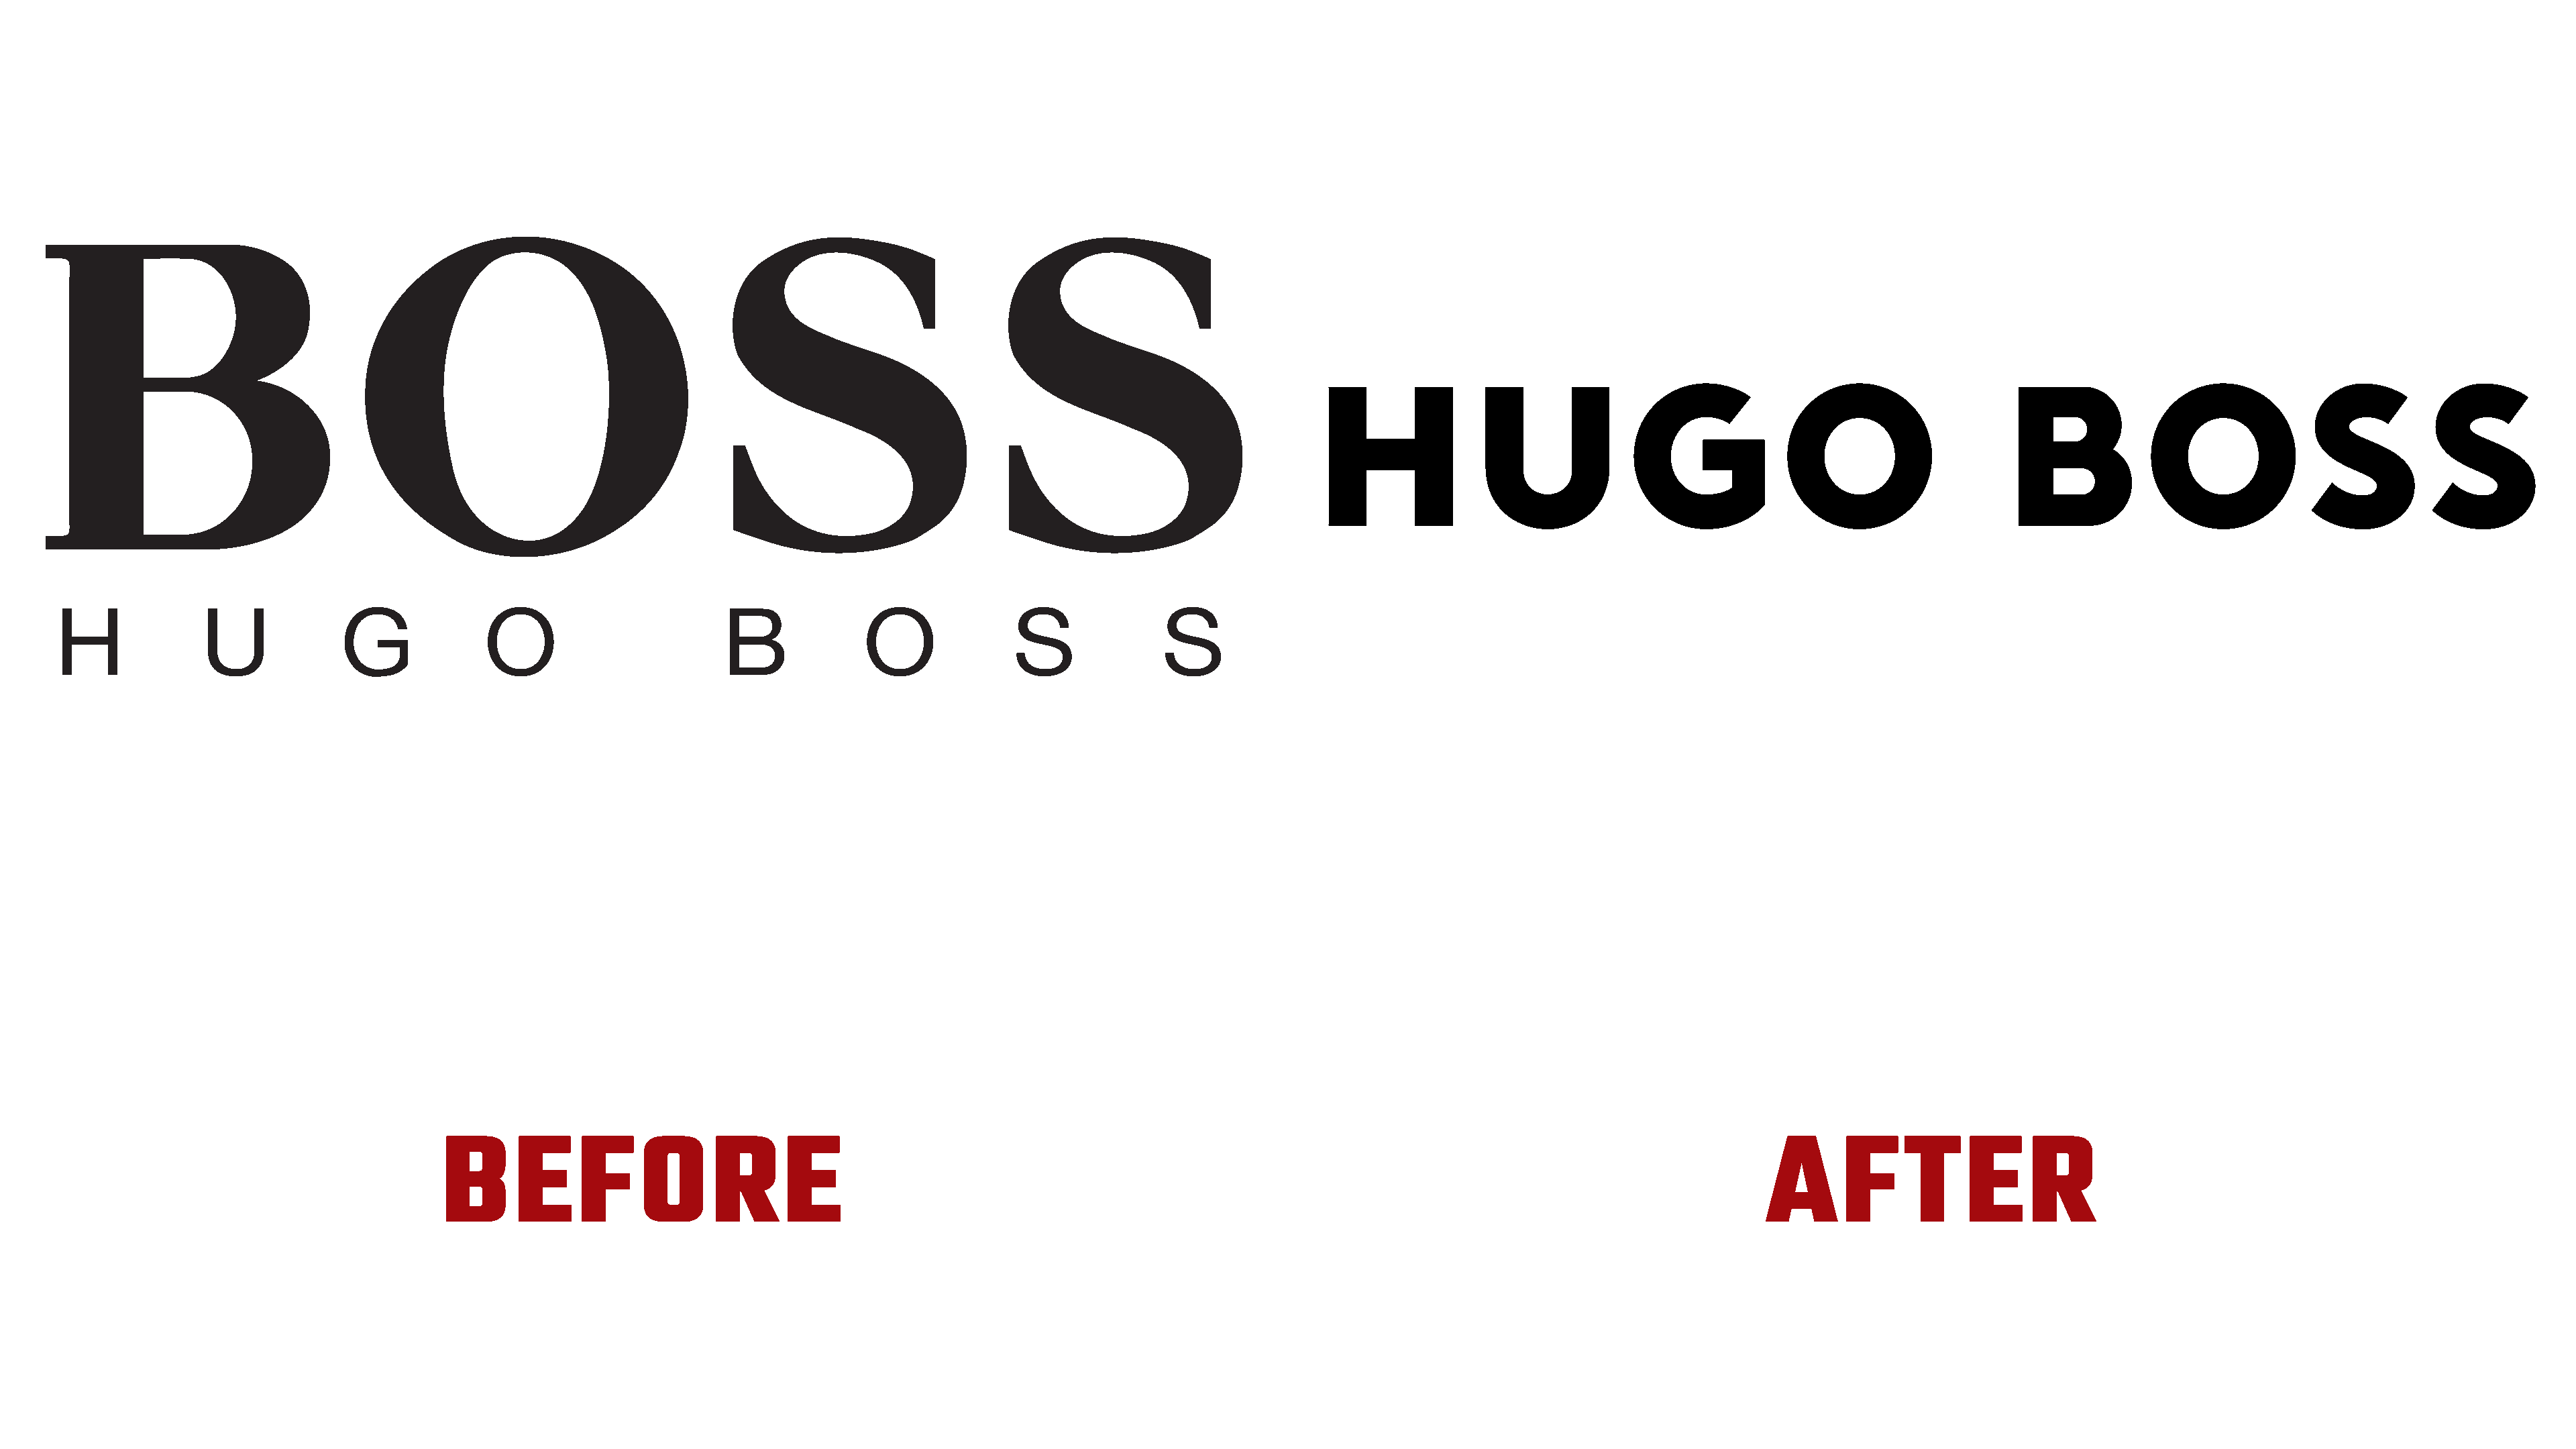 Hugo Boss Logo And Symbol, Meaning, History, PNG, Brand | vlr.eng.br